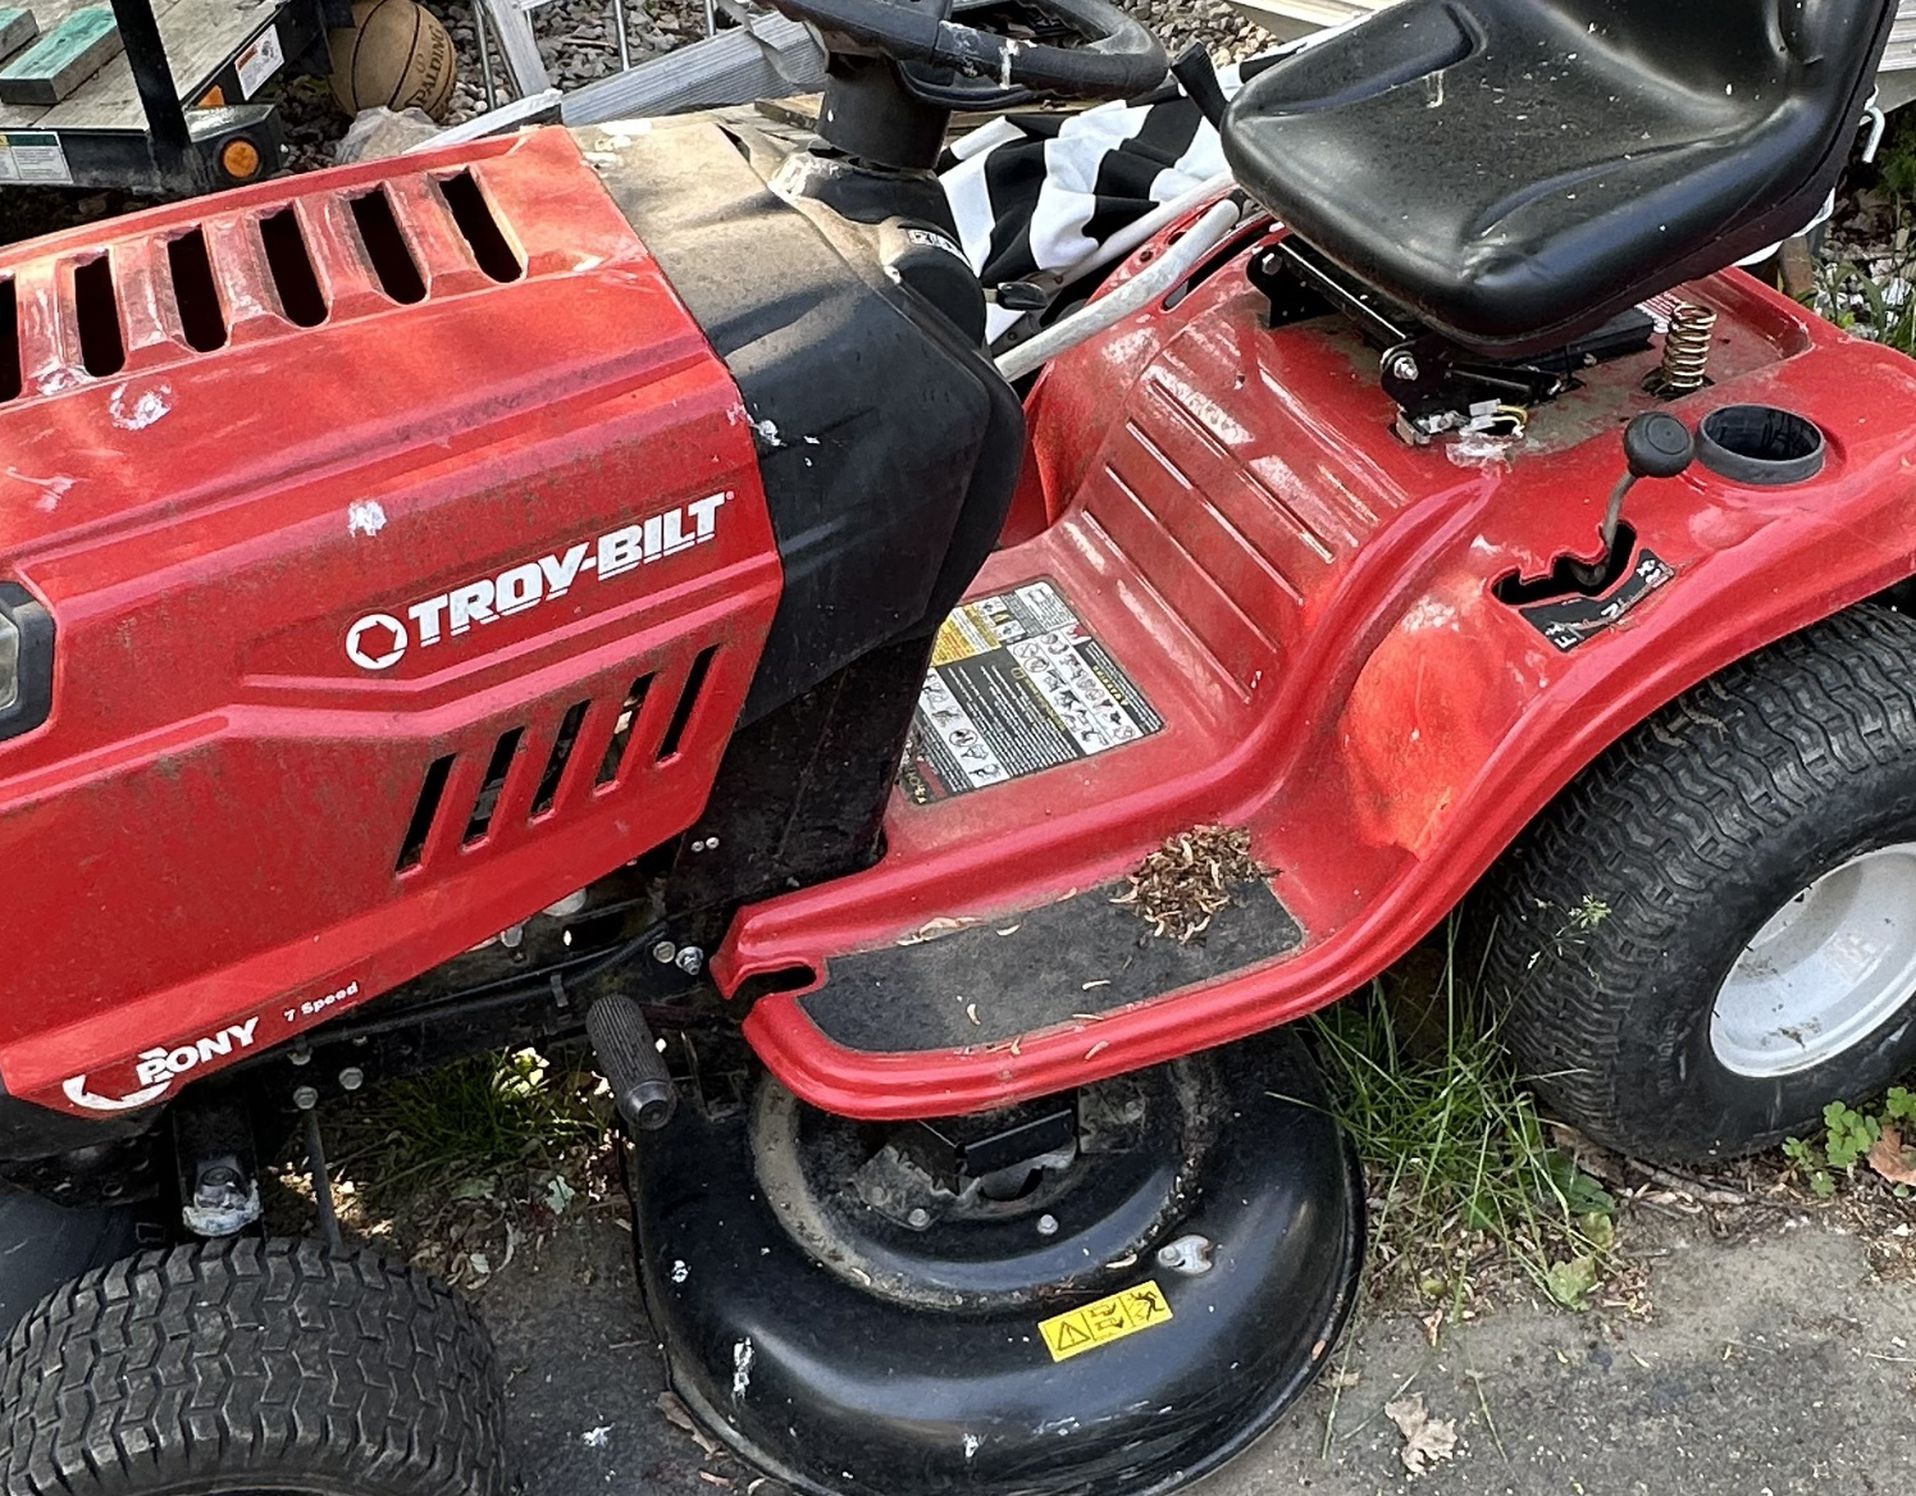 Troy Built Ride on lawn mower 